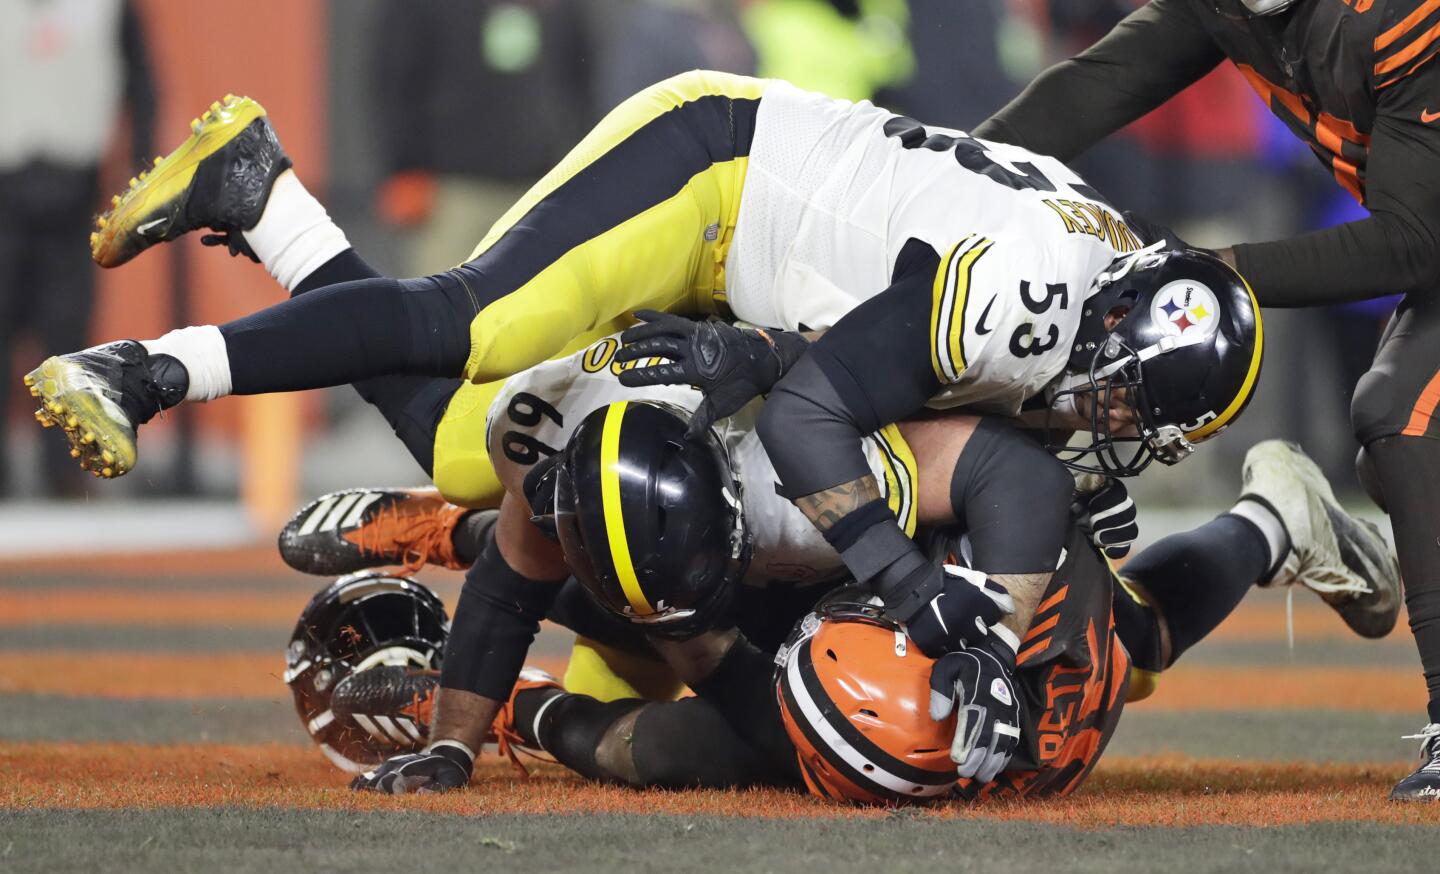 Browns defensive end Myles Garrett, bottom, and, Steelers center Maurkice Pouncey (53) and offensive guard David DeCastro (66) fall to the turf during a brawl on Nov. 14.